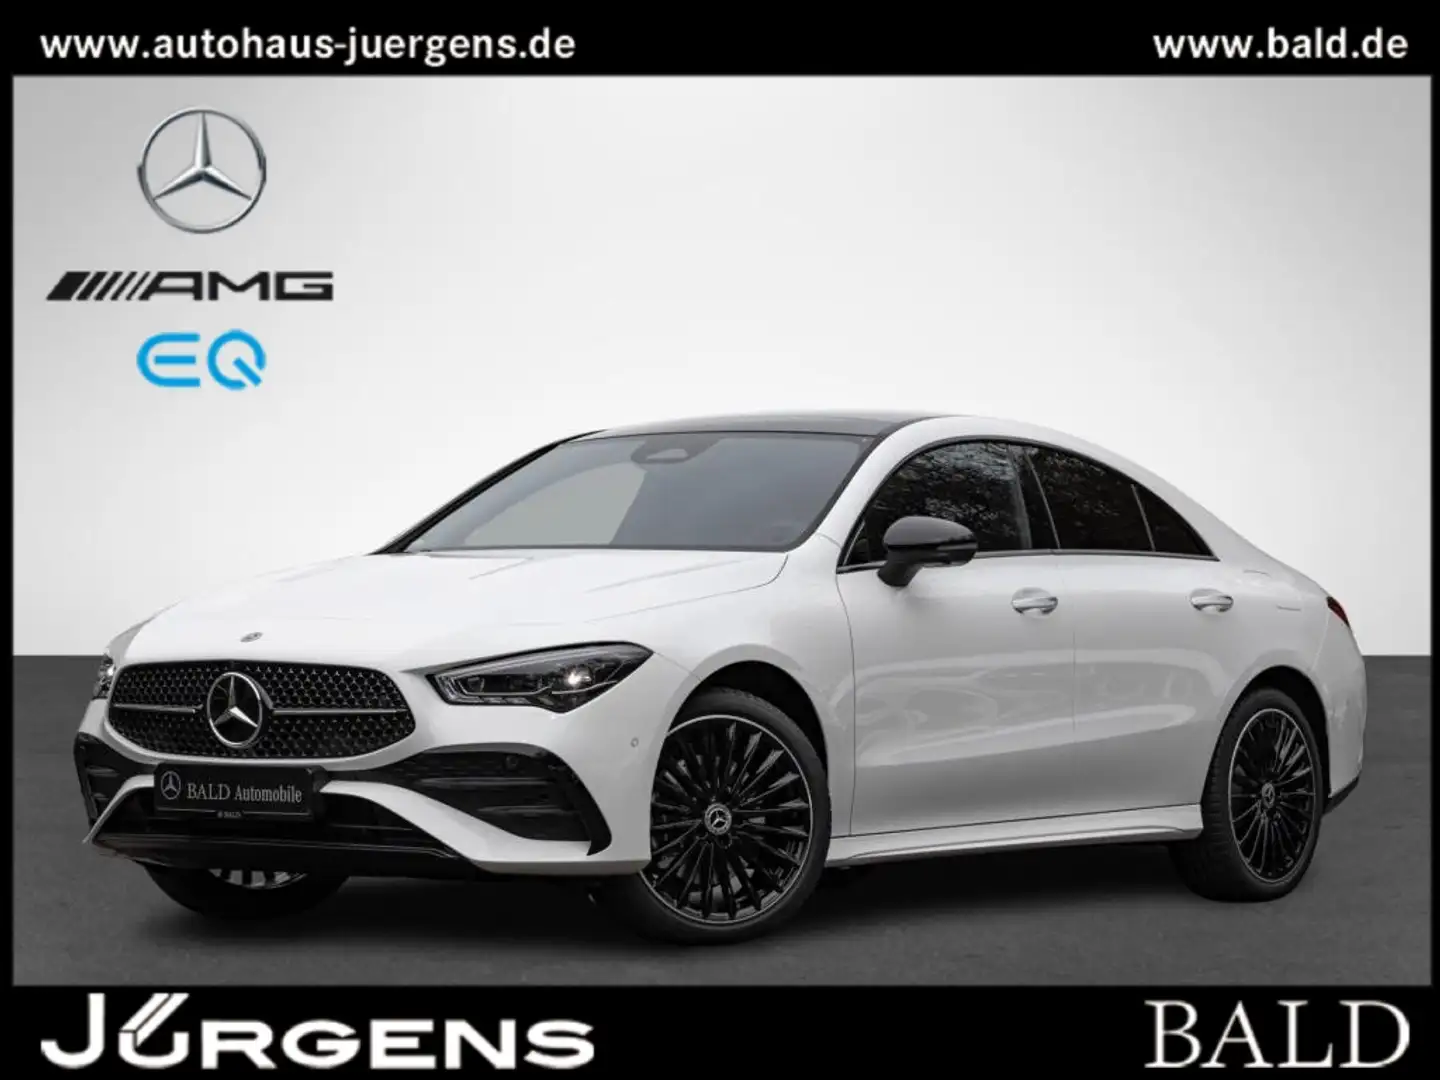 Mercedes-Benz CLA 250 e AMG/Wide/ILS/Pano/360/Totw/Night/19" Wit - 1